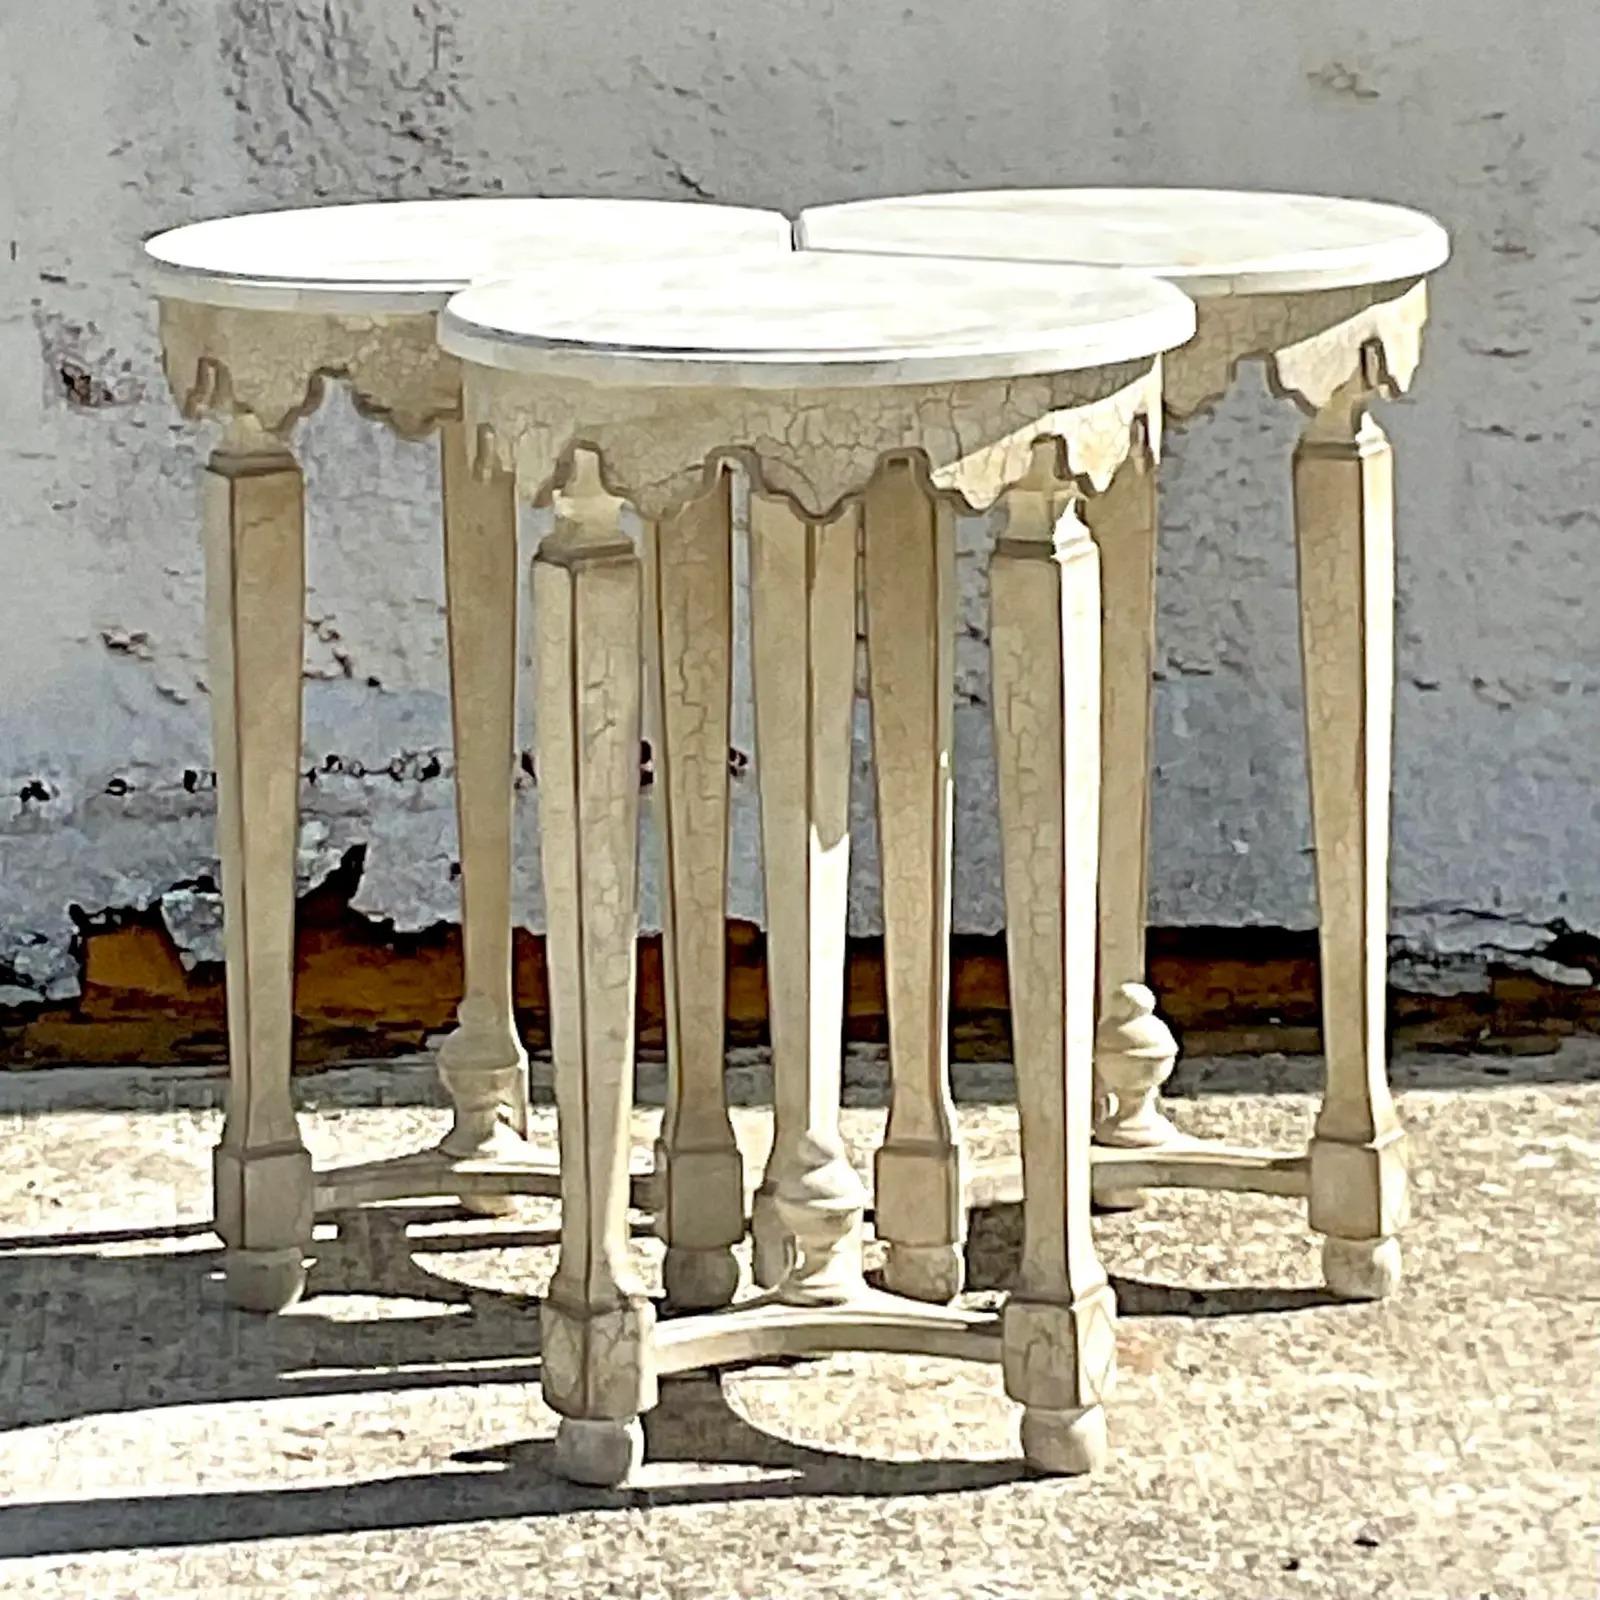 A fantastic set of vintage Regency nesting tables. Beautiful hand painted detail and a charming scalloped edge. The tables sit together as one and then are easily moved apart to make three separate drinks tables. Great for entertaining! Two sets